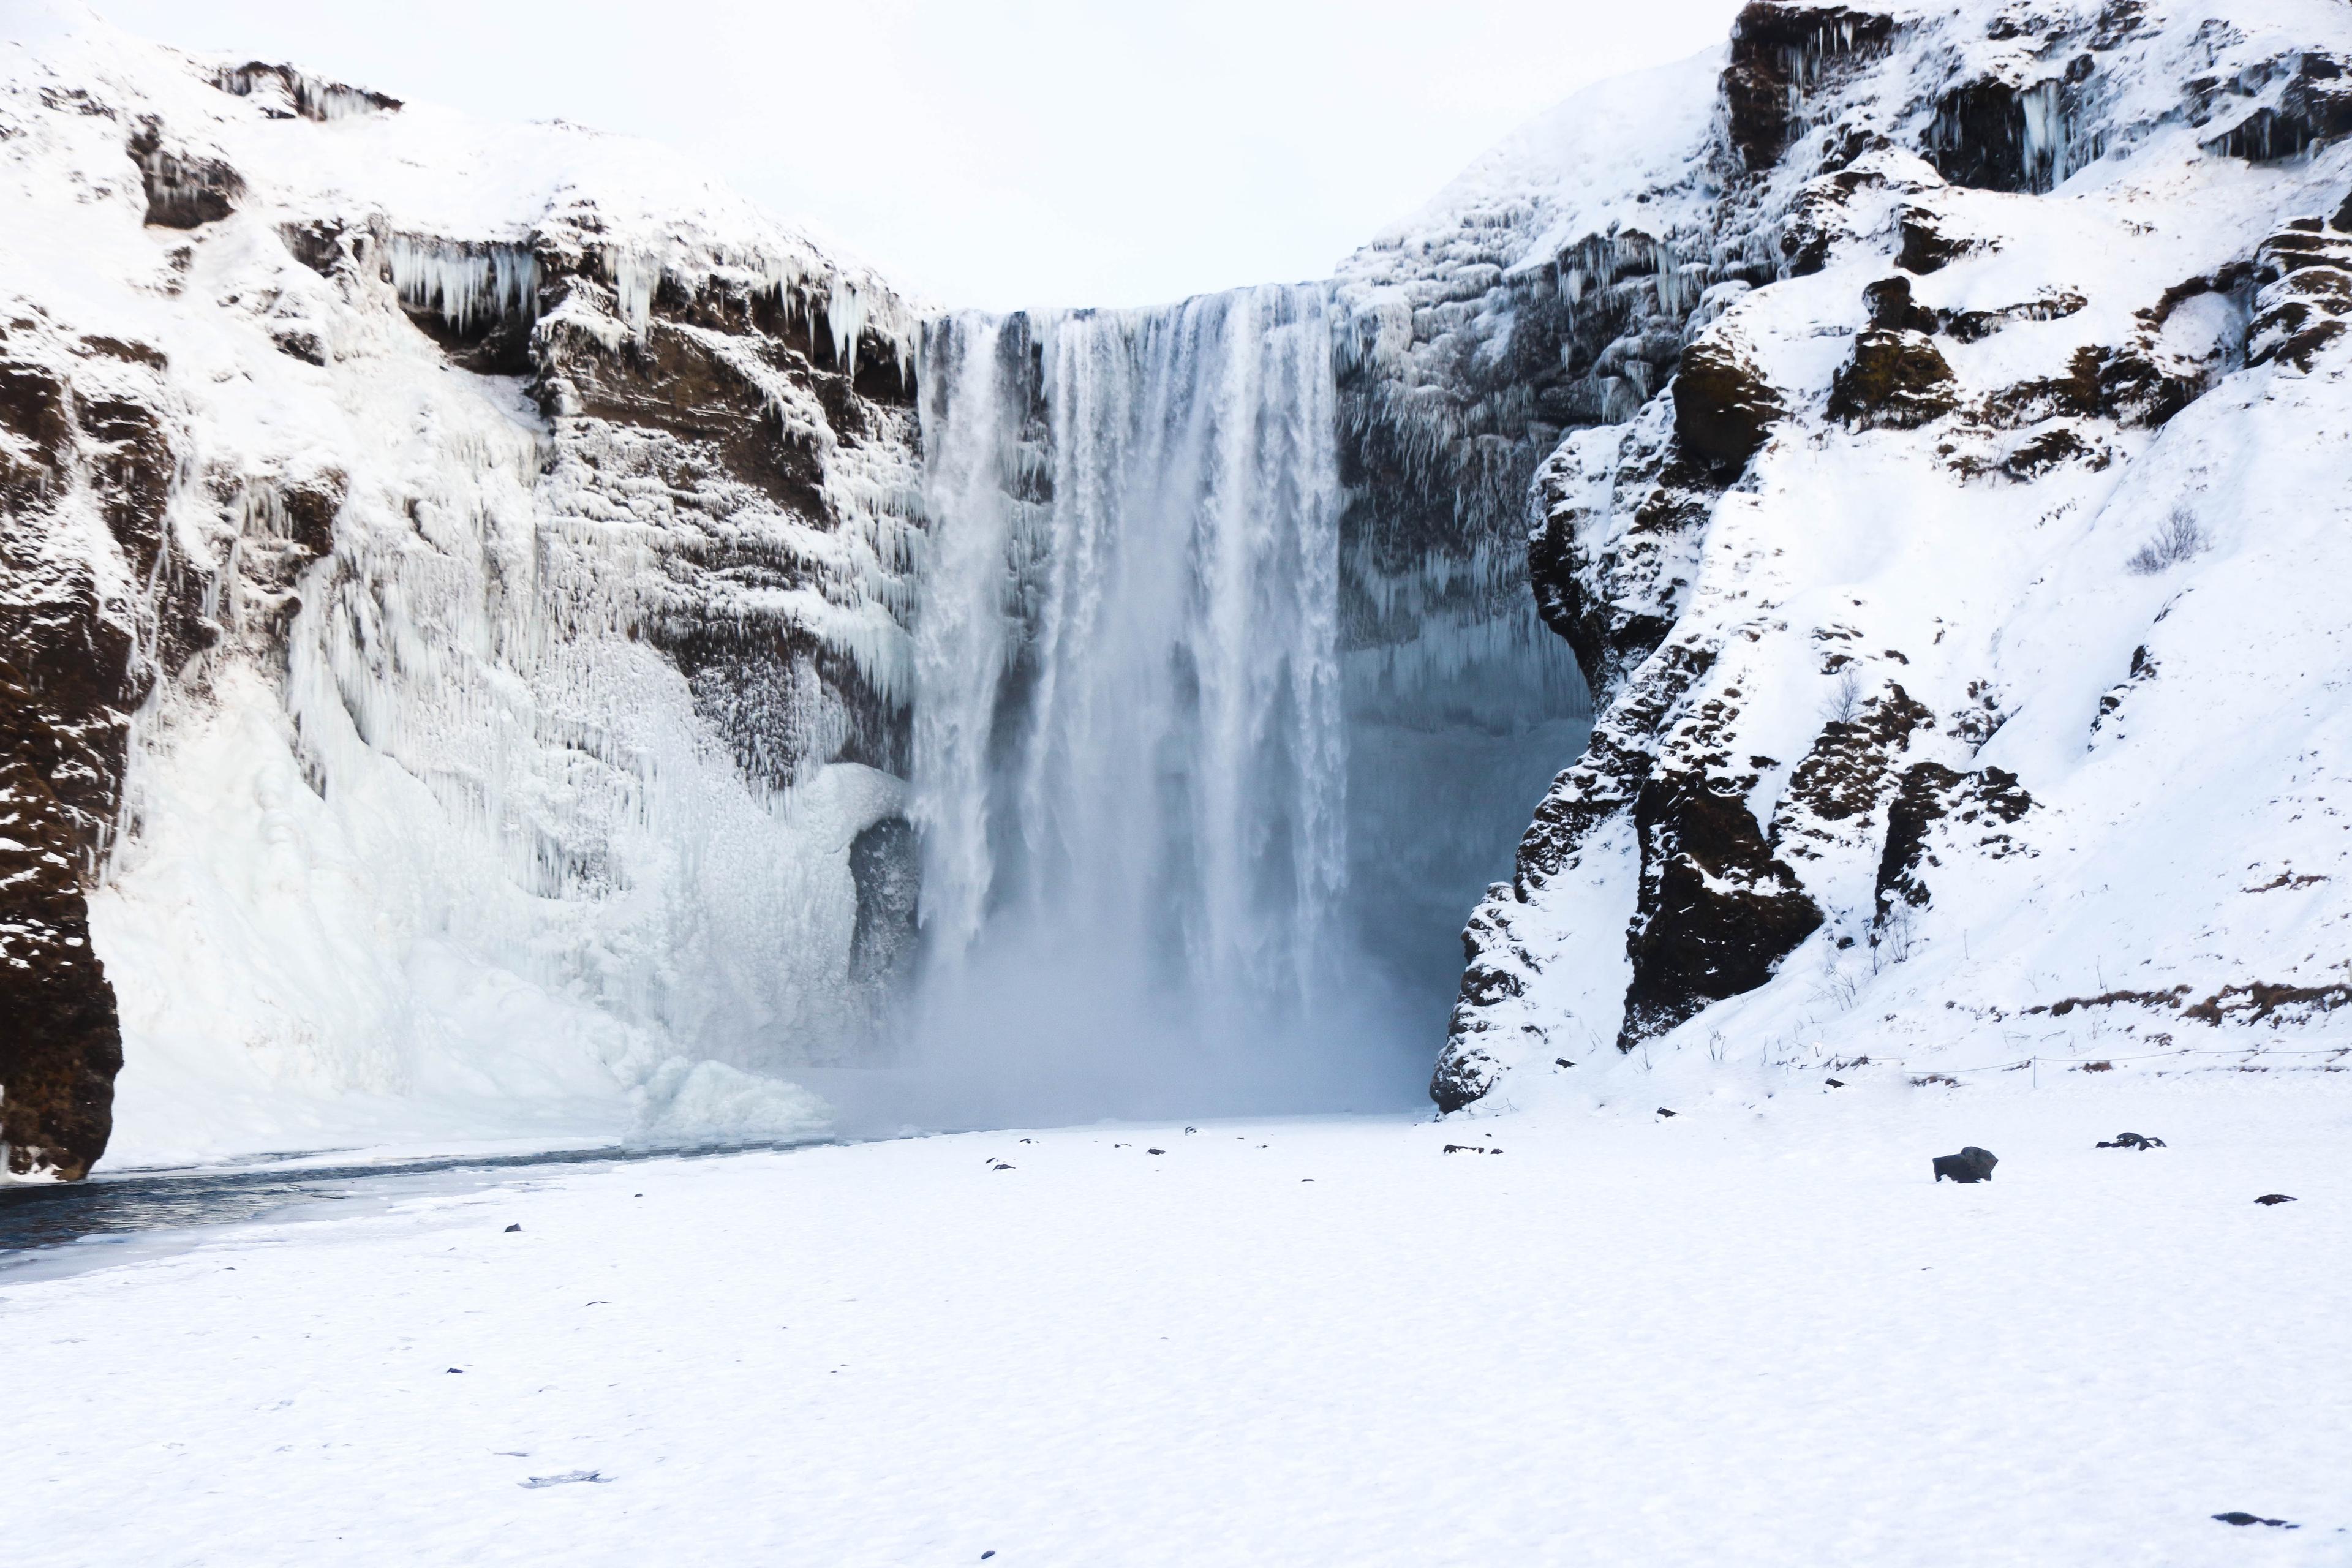 a majestic waterfall in winter, with water cascading down from a height and a cloud of mist rising from where the water meets the frozen river below. The waterfall is flanked by ice-covered cliffs, and the surrounding landscape is blanketed with snow